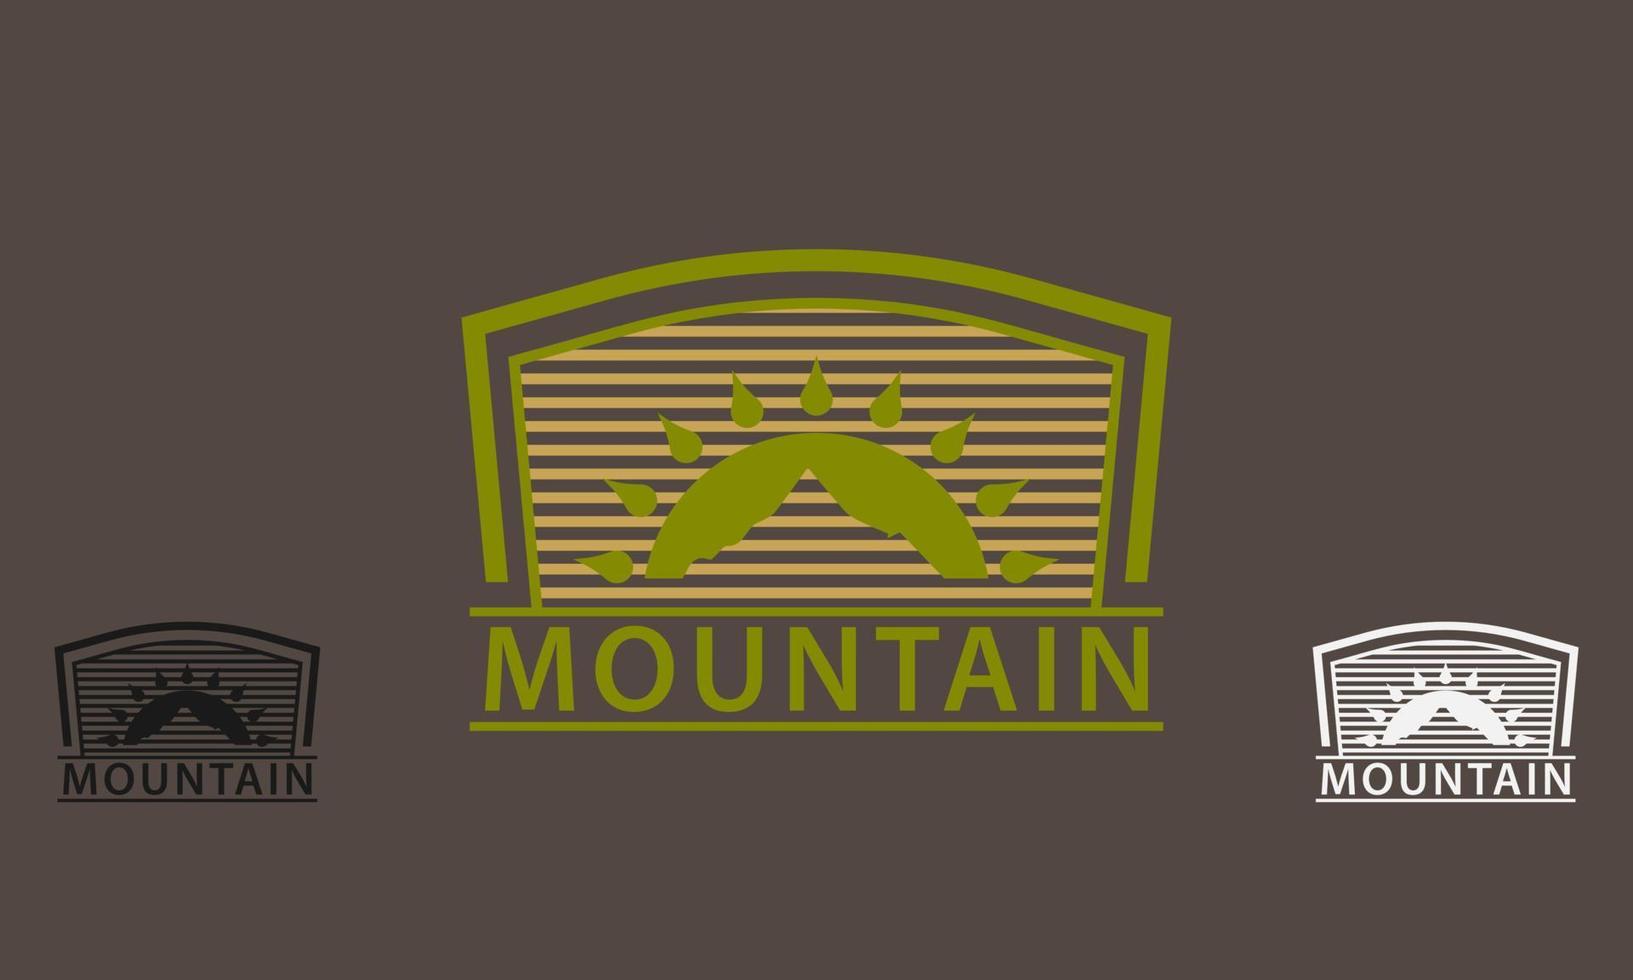 star mountain element in a striped background logo icon vector